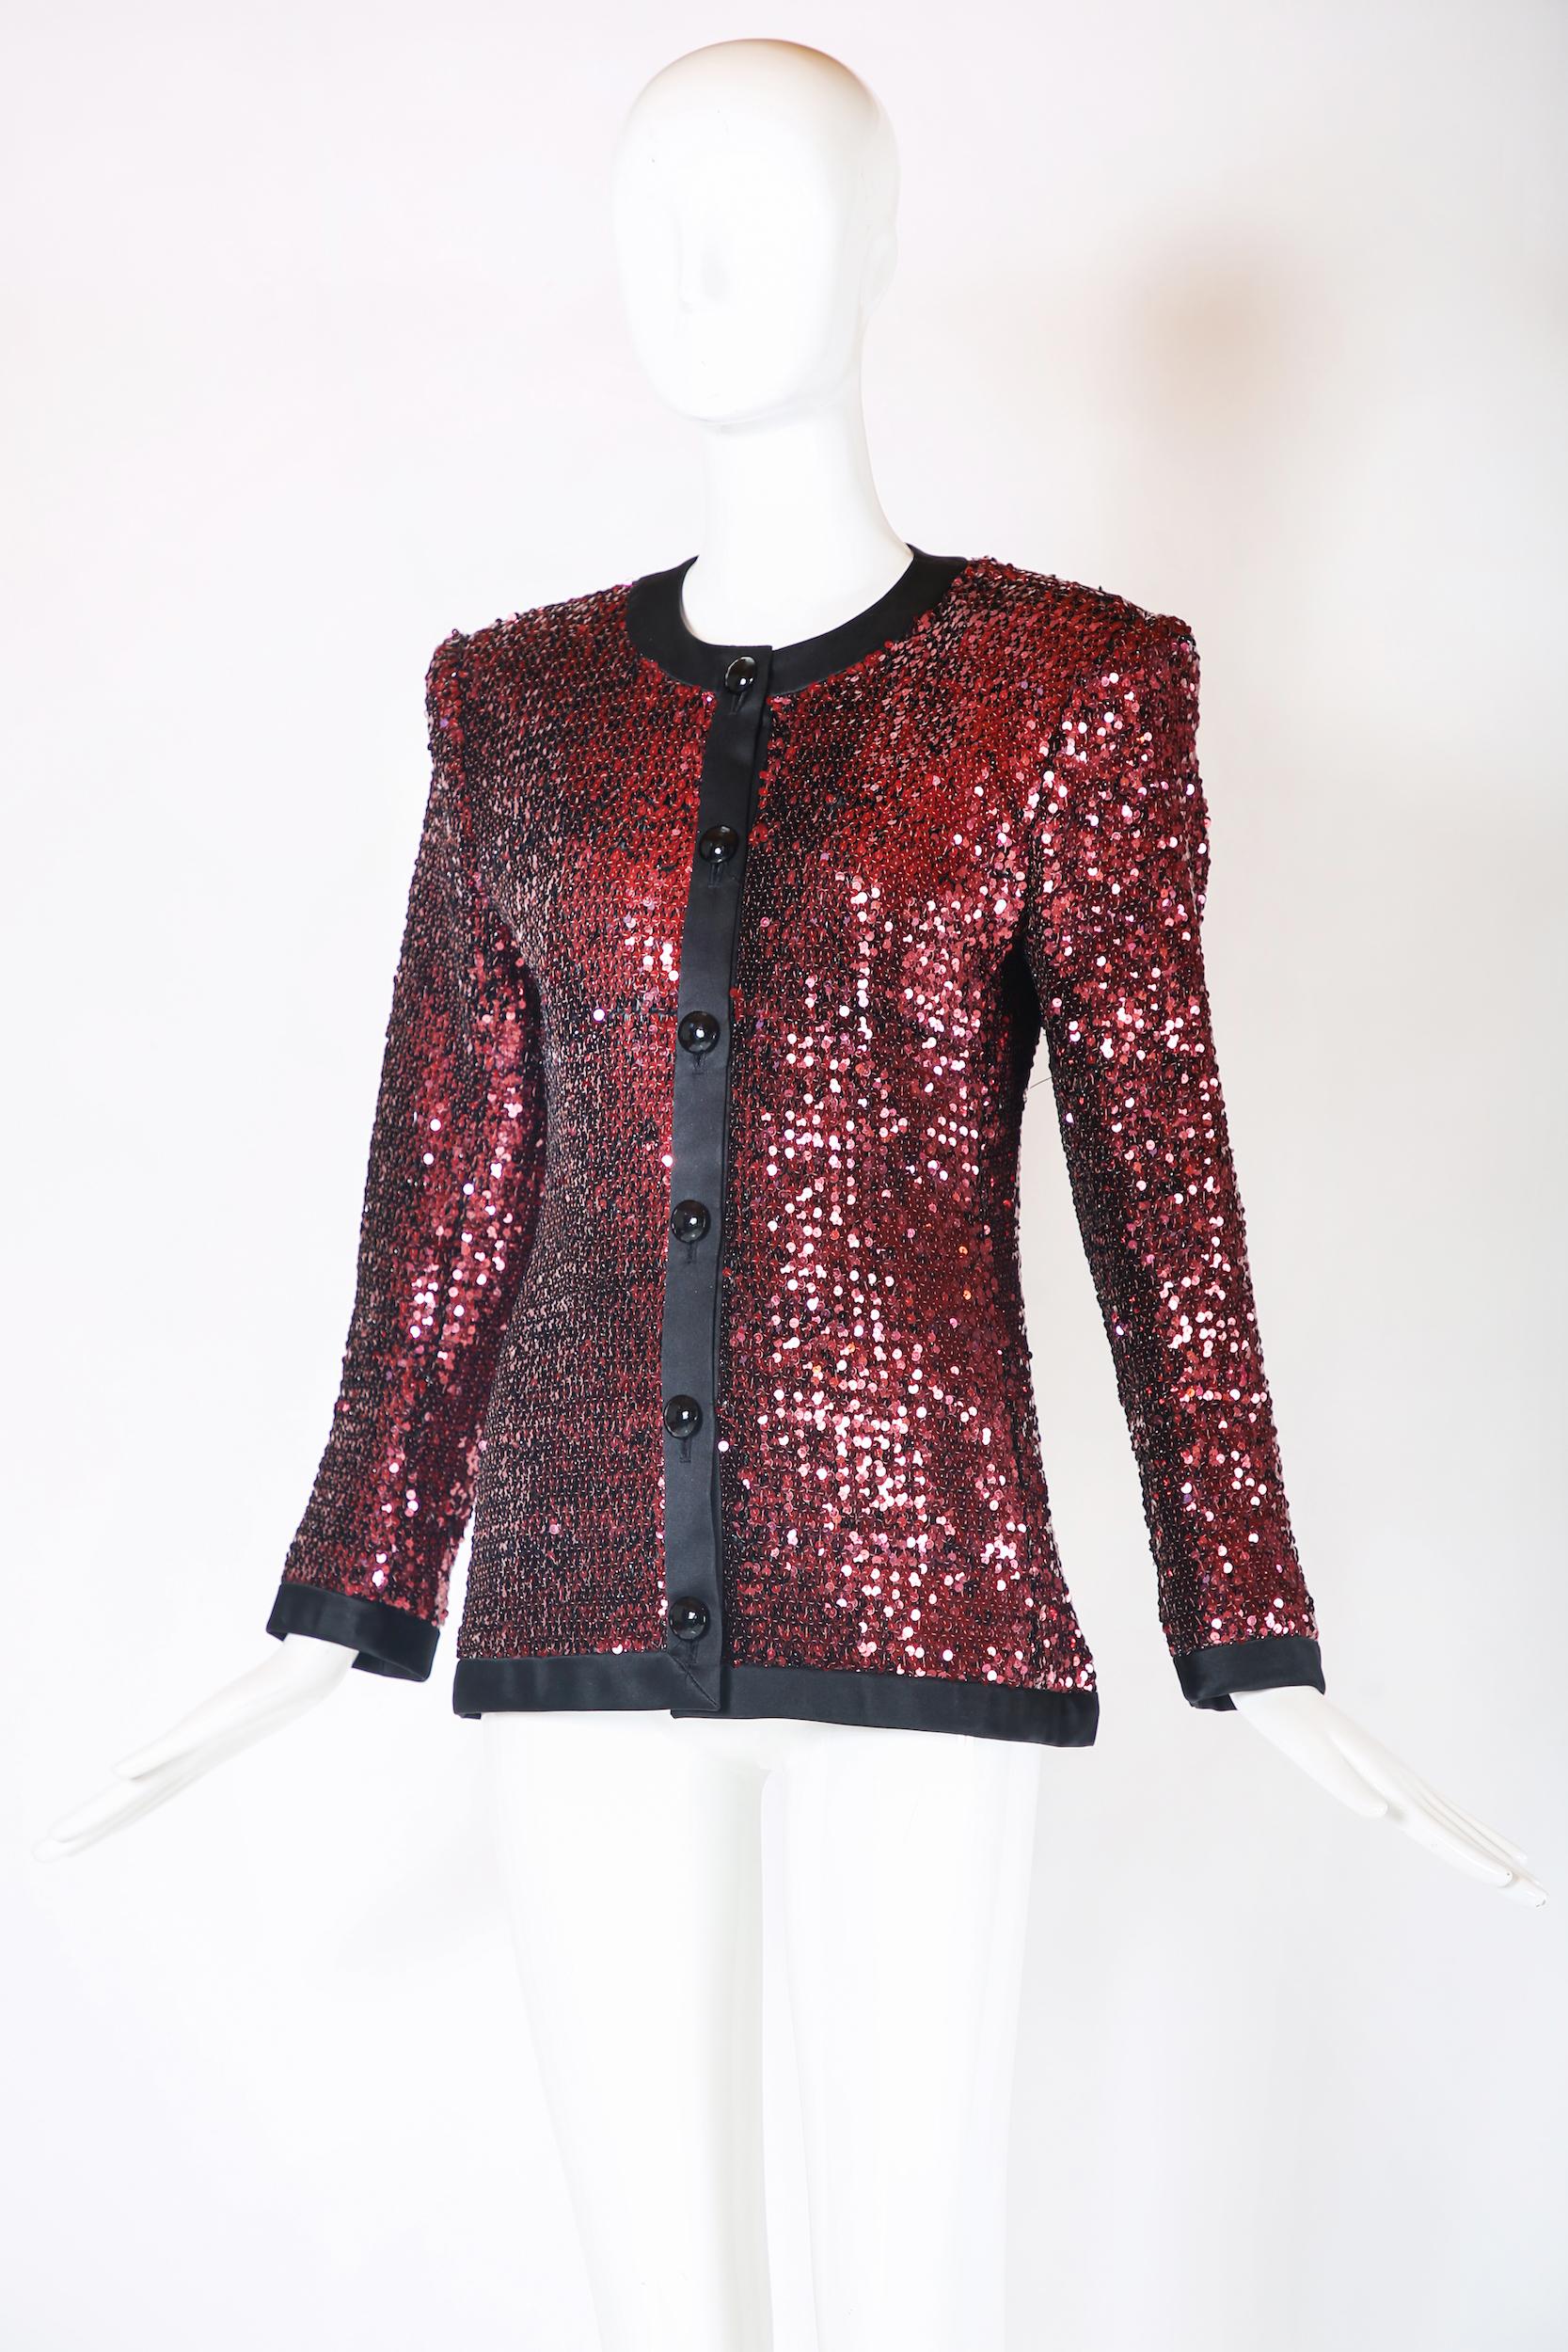 Vintage Yves Saint Laurent dinner jacket covered with reddish/dark pink sequins and trimmed with black silk. Features oversized black dome-shaped buttons and is lined in silk at the interior. Tag size 38 but please consult measurements as vintage